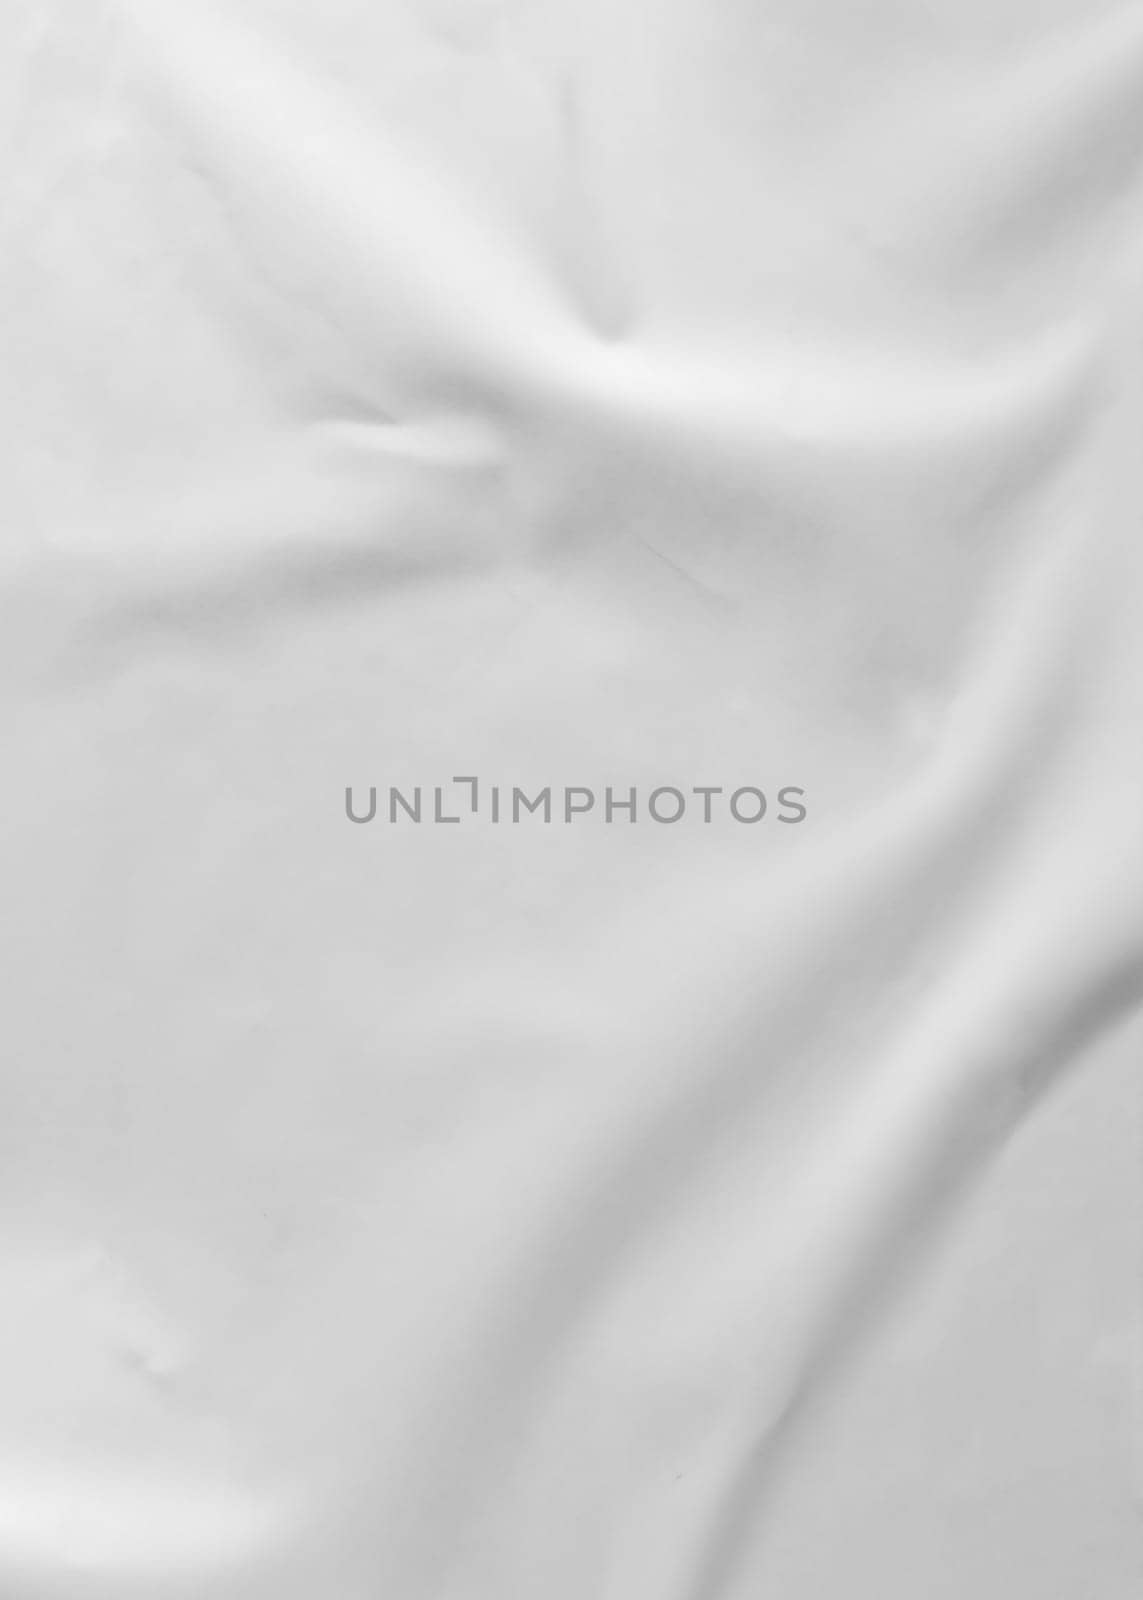 Vertical photo of crumpled gray thin paper by Mastak80